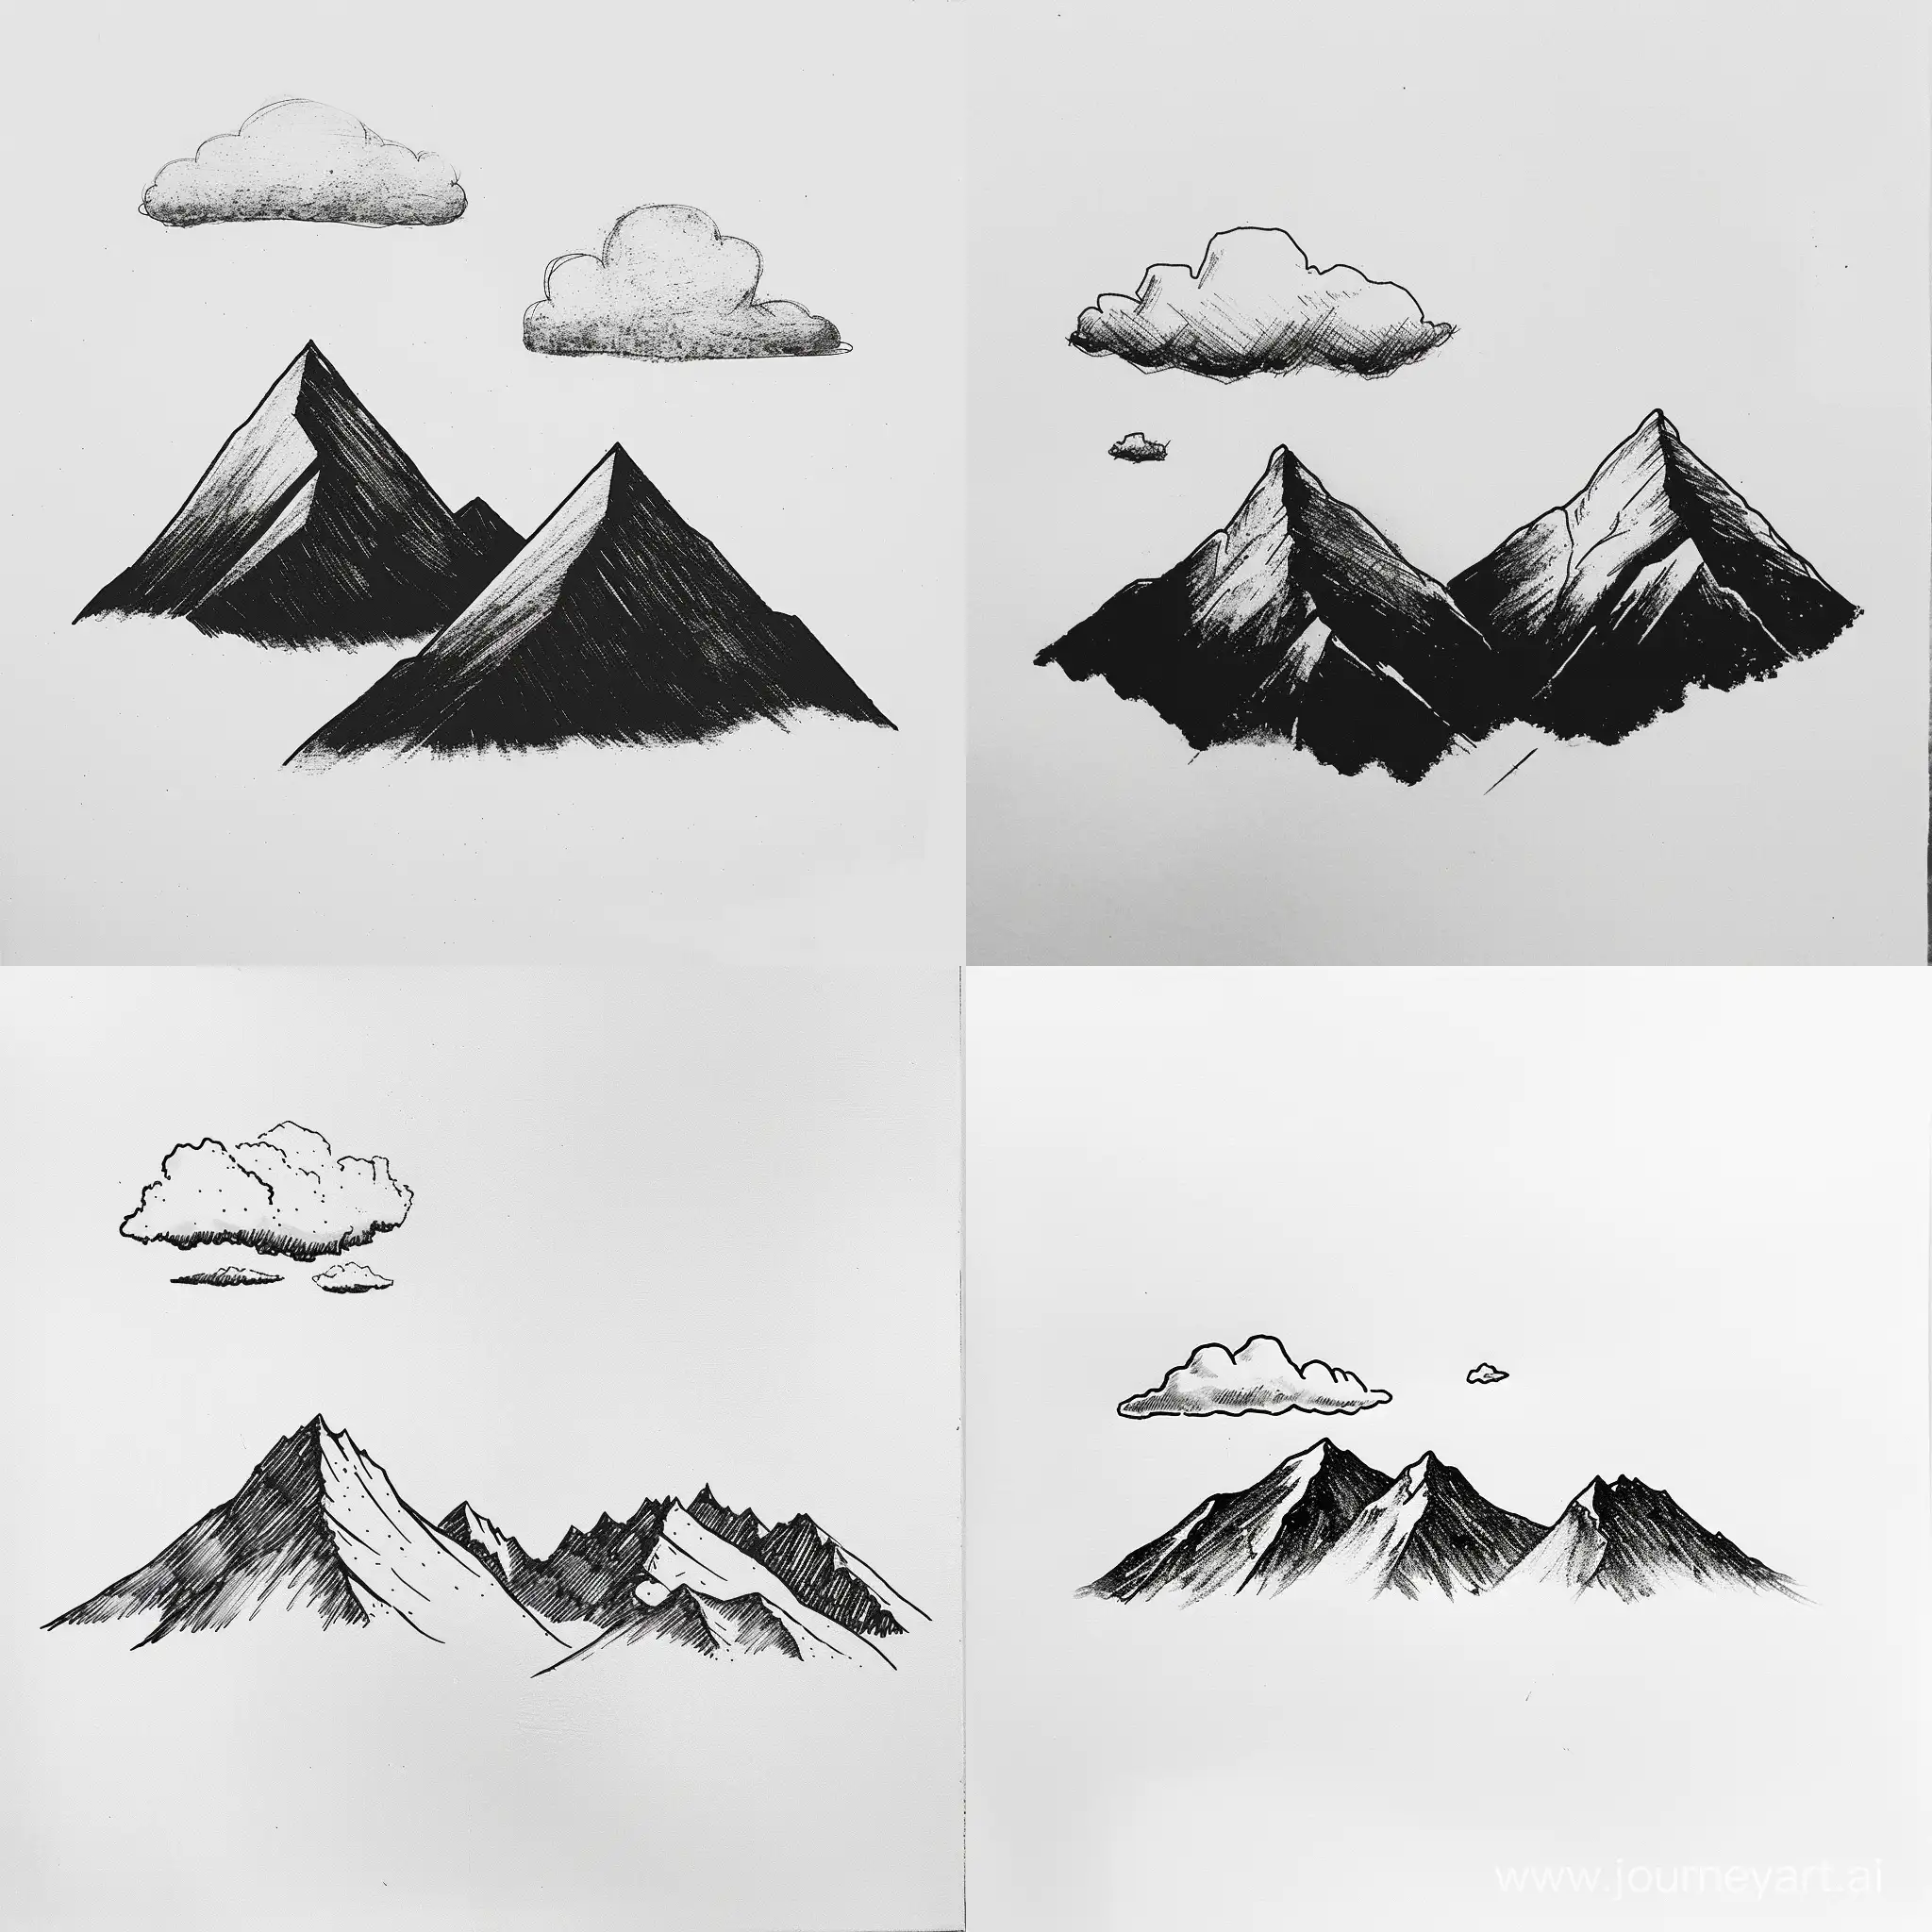 Minimalist-Mountain-Landscape-1990s-Ink-Painting-with-MGMTInspired-Modern-Twist